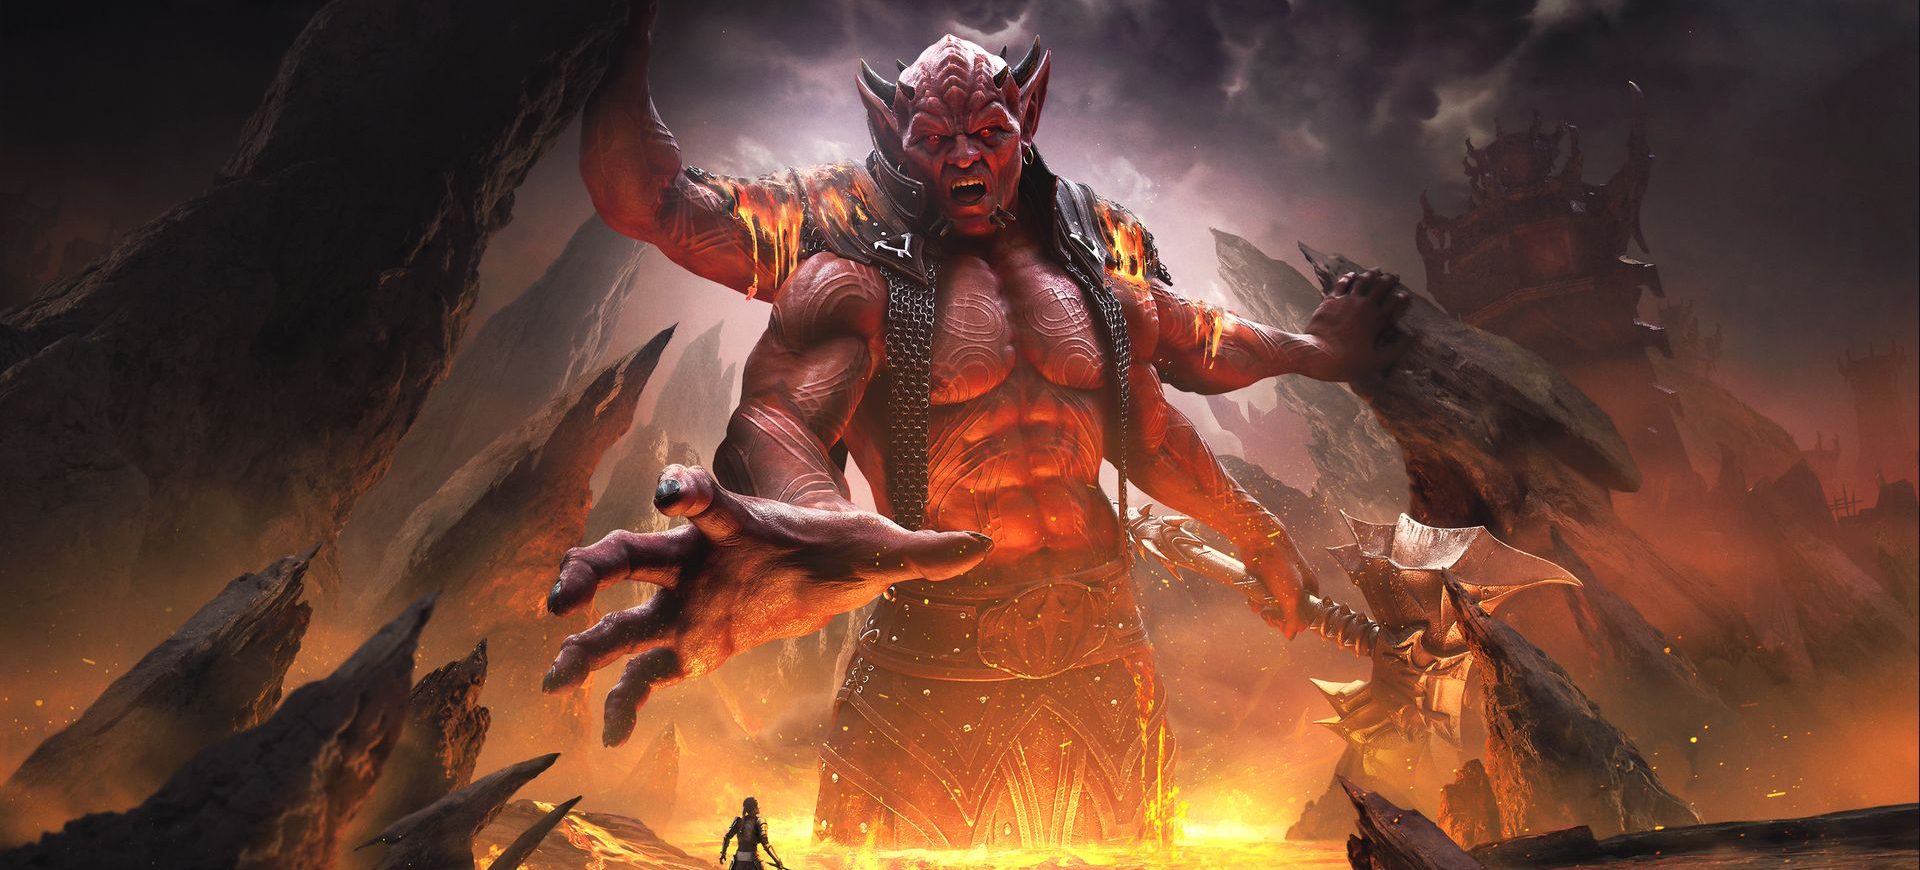 The Next Big Update for ESO Already Arriving (Firesong DLC)